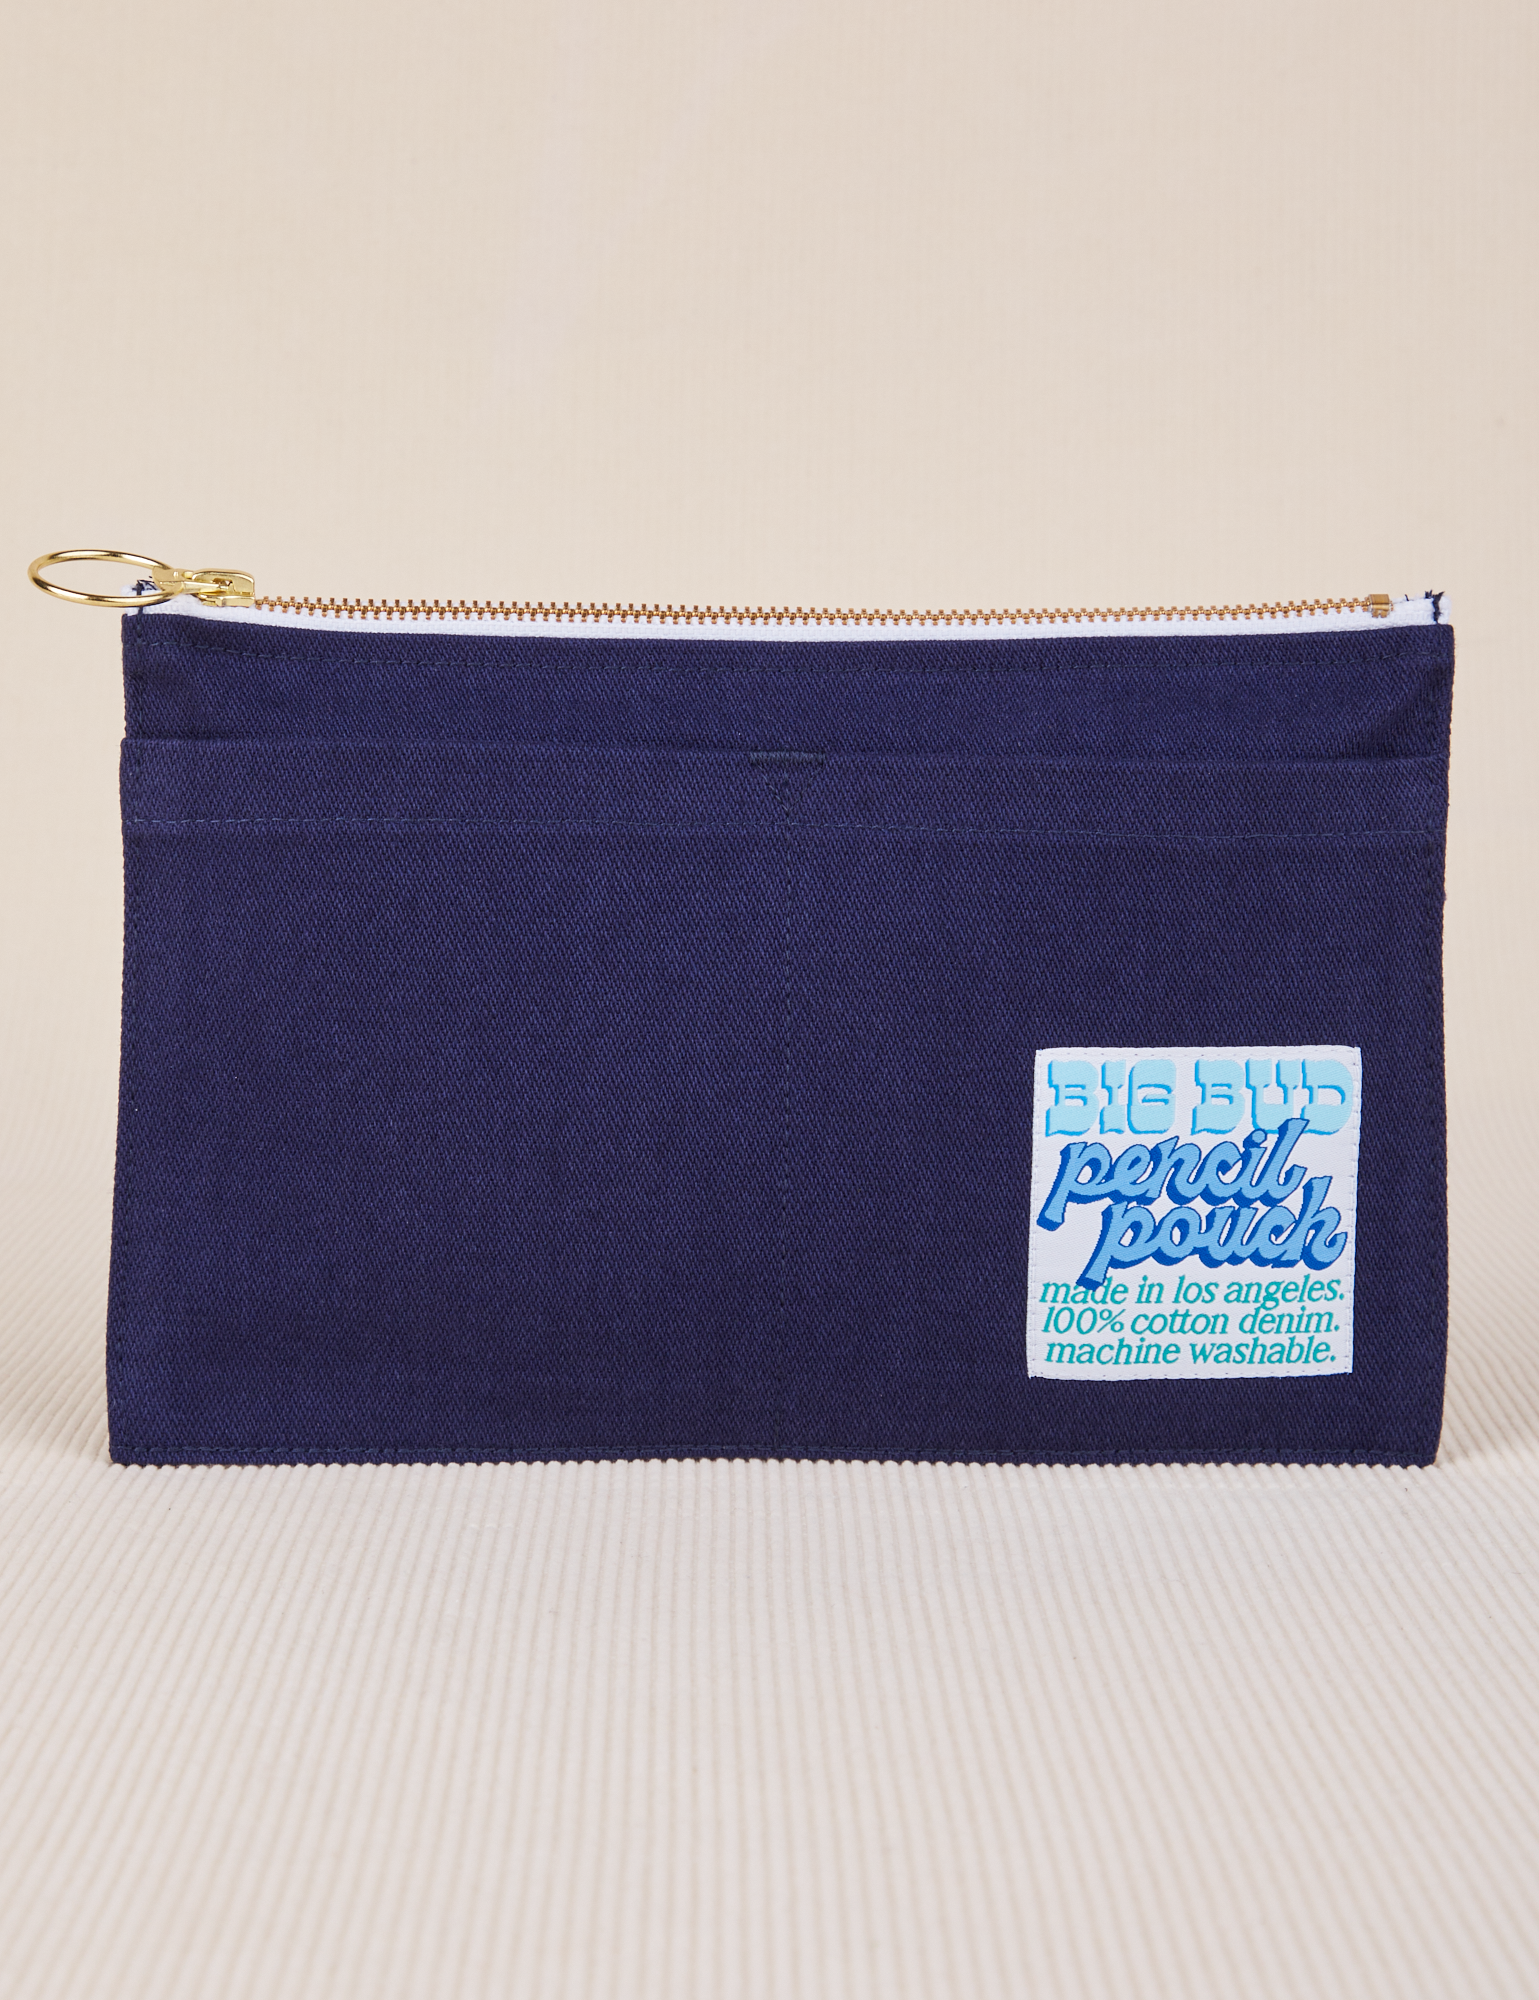 Pencil Pouch in Navy Blue